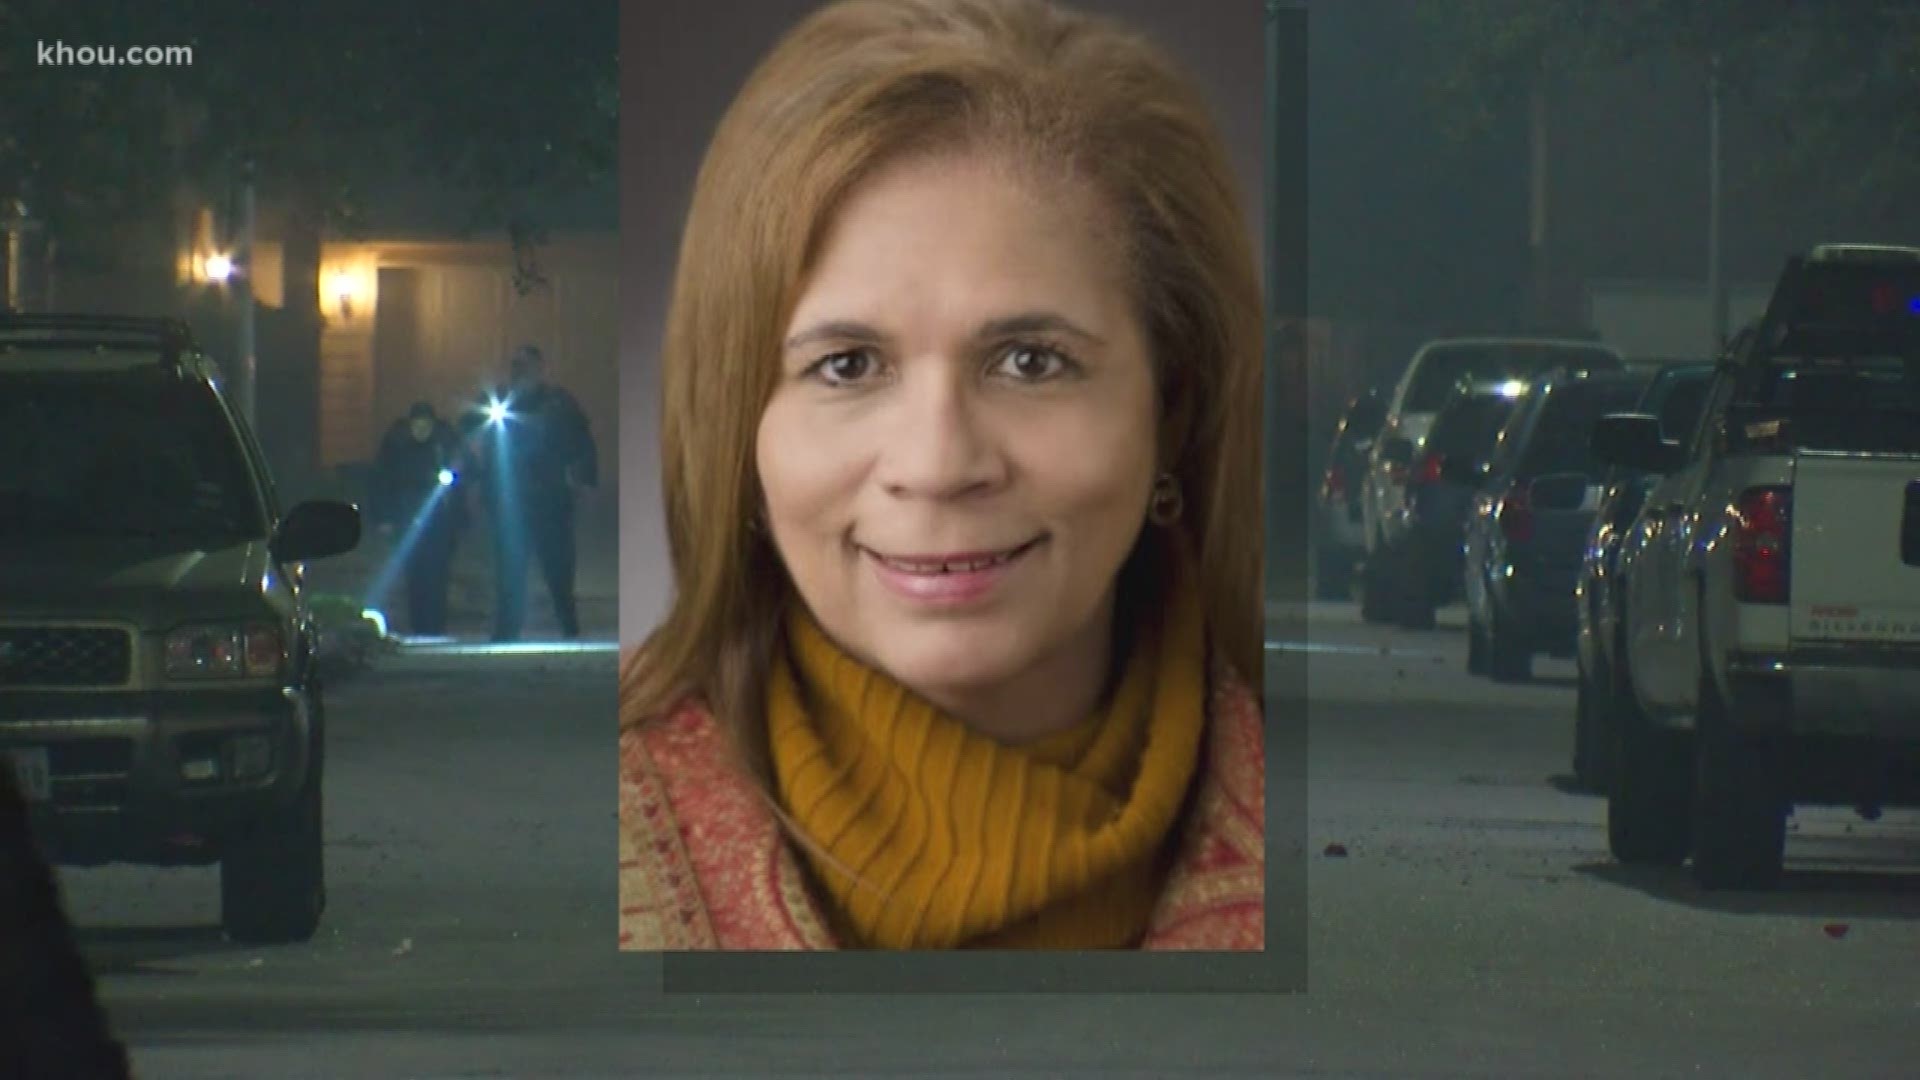 A 61-year-old woman died after deputies say she was struck by a bullet from celebratory gunfire during a New Year’s celebration overnight.